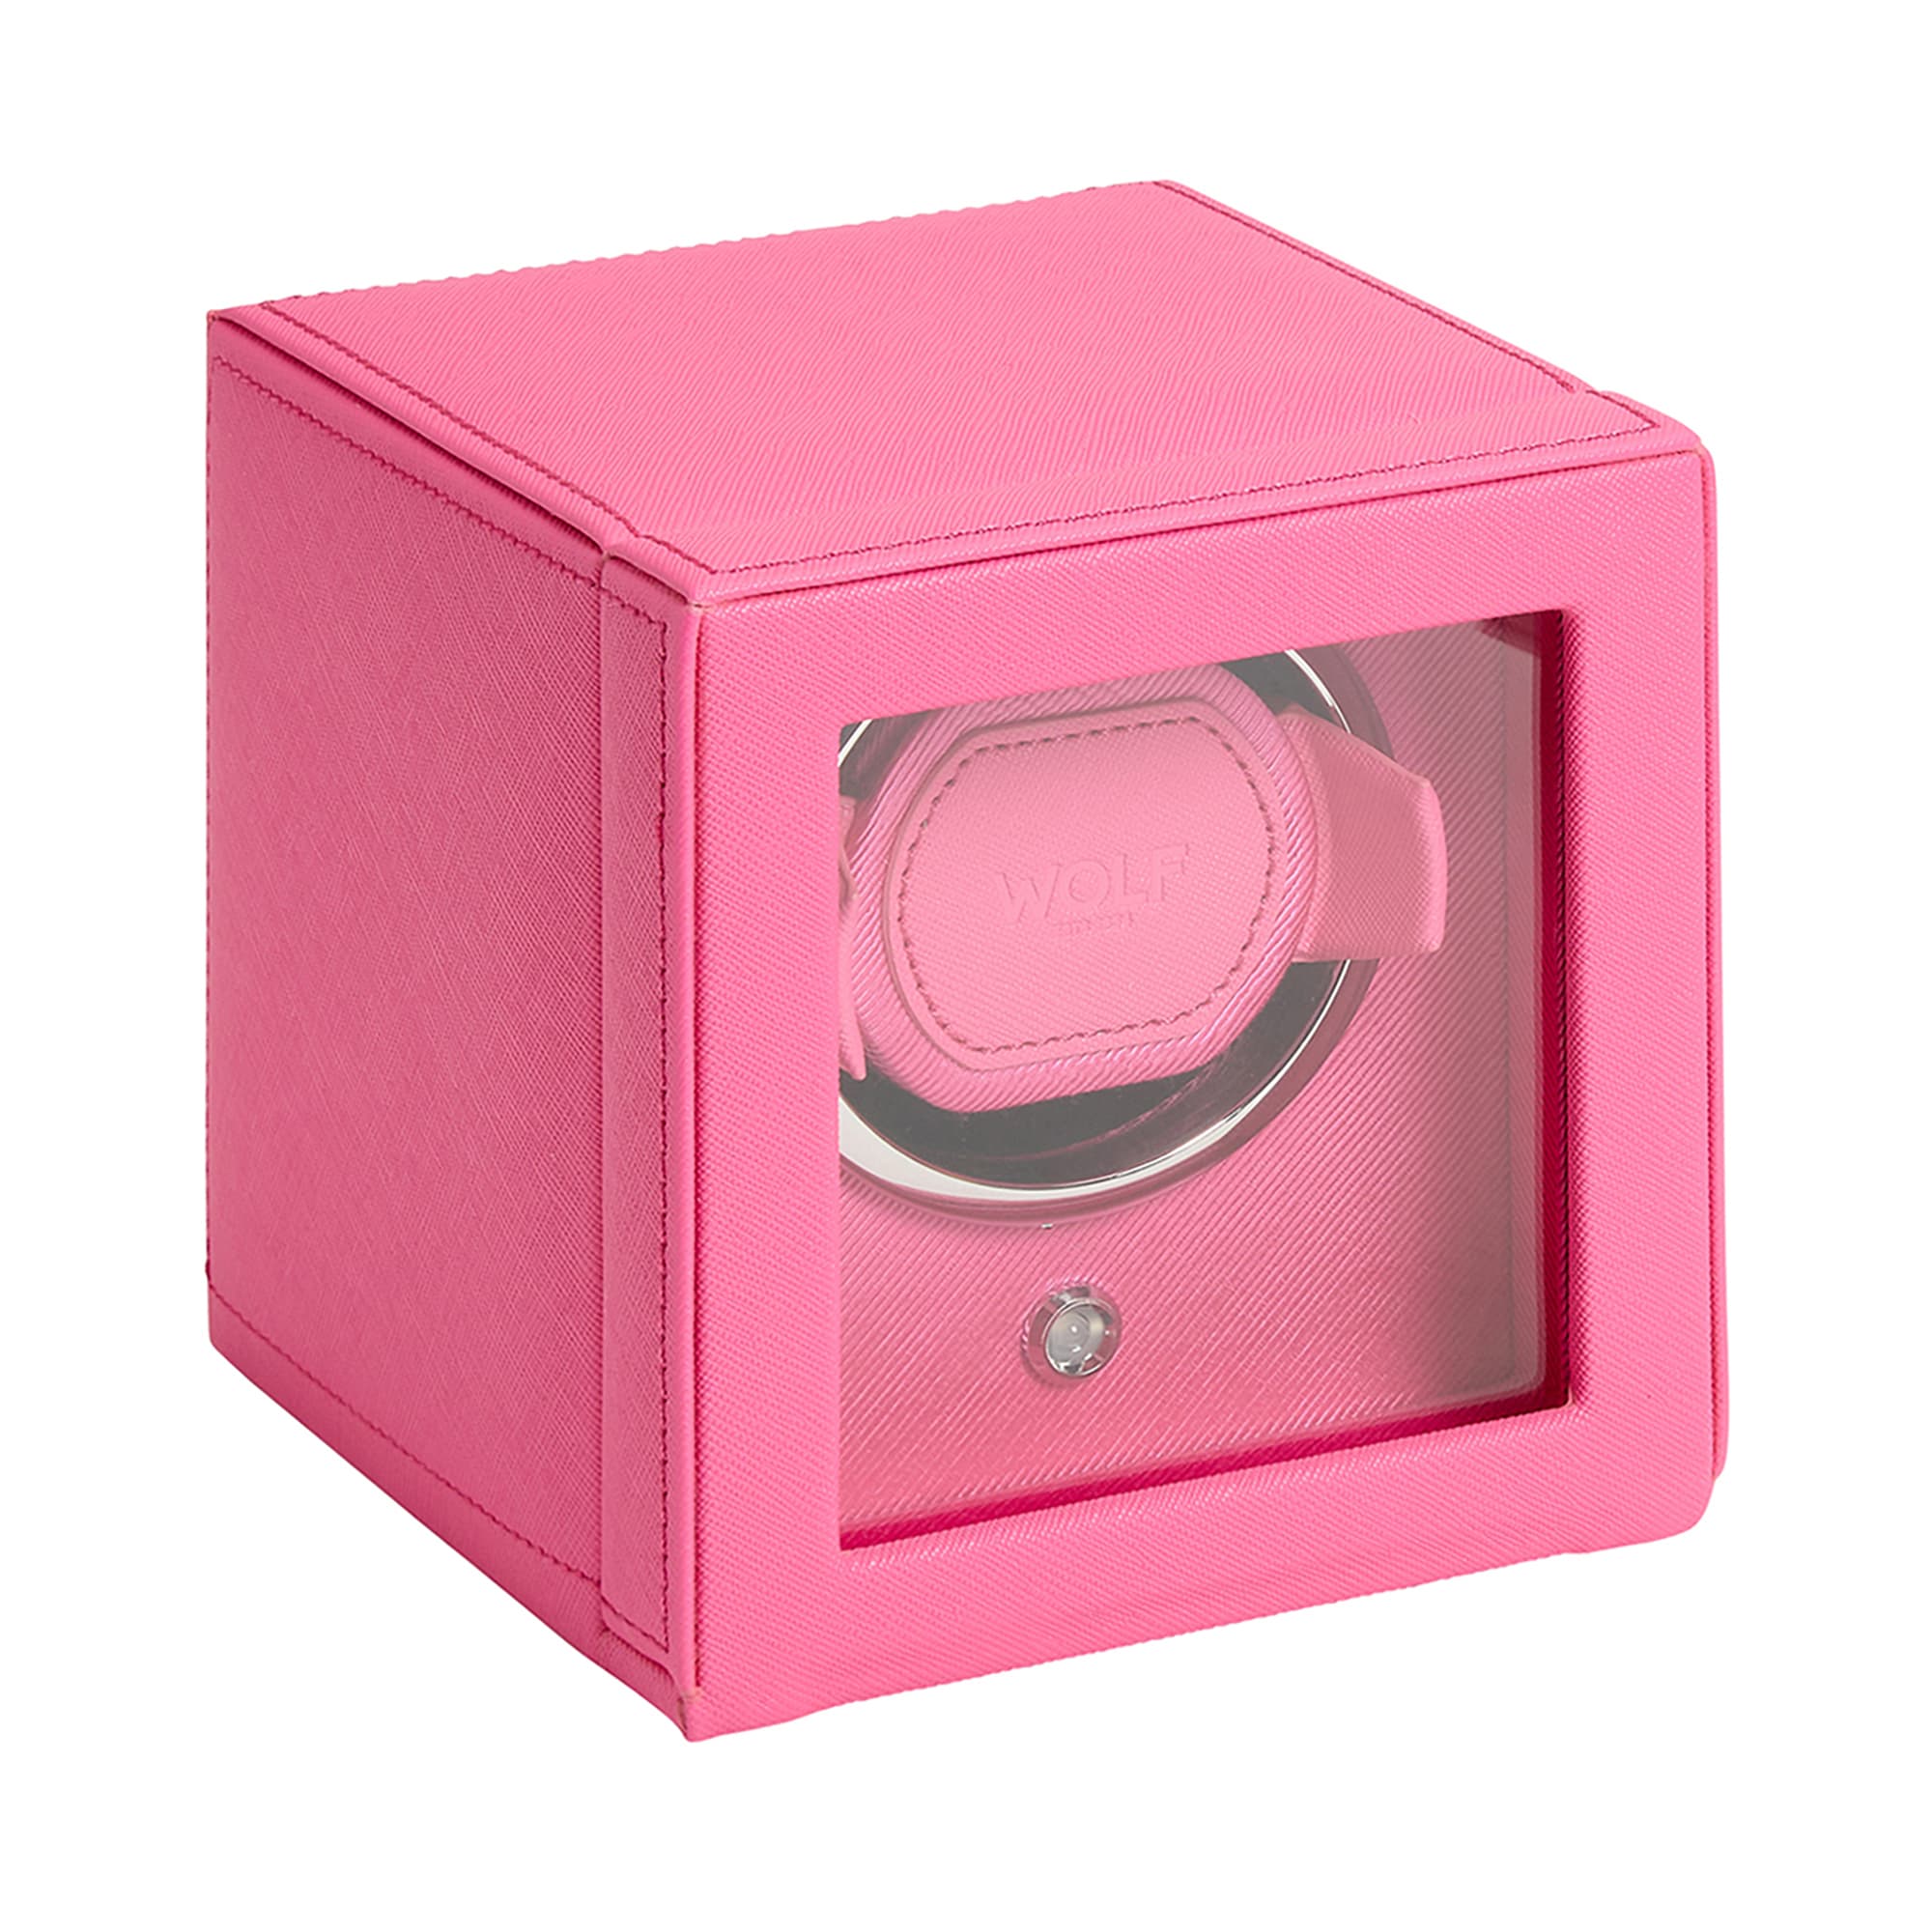 Wolf-Cub-Single-Watch-Winder-with-Cover-Pink-461190-1